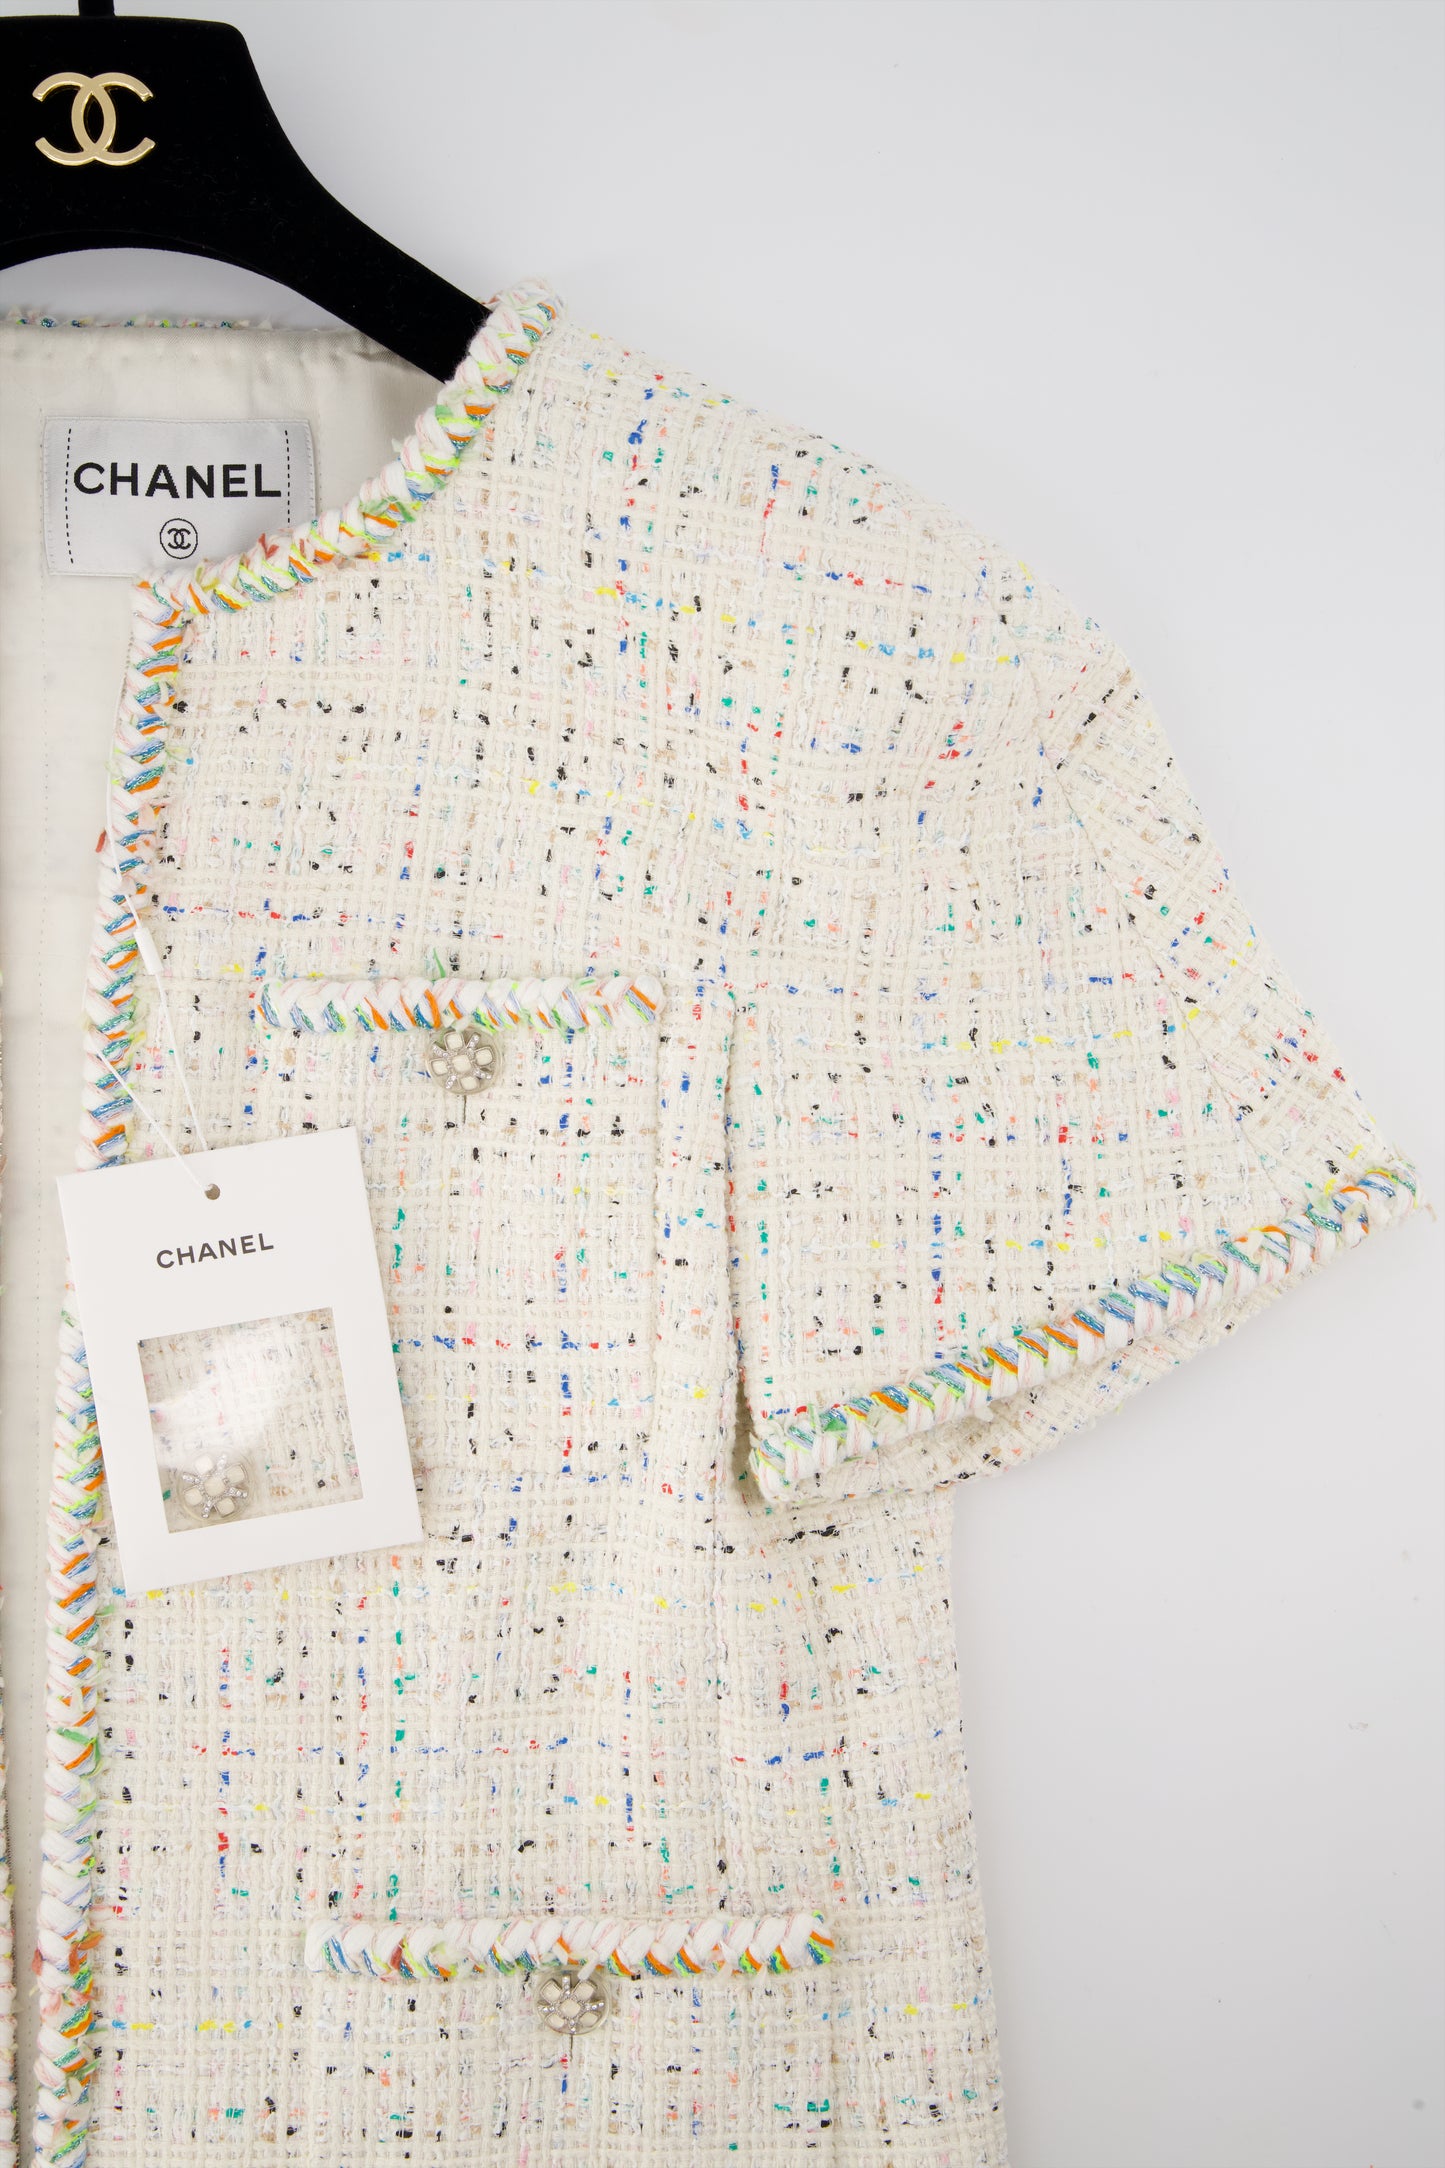 *HOT* Chanel Ecru, Blue, Yellow, Pink Tweed Jacket with CC Button Details FR 40  (UK 12)